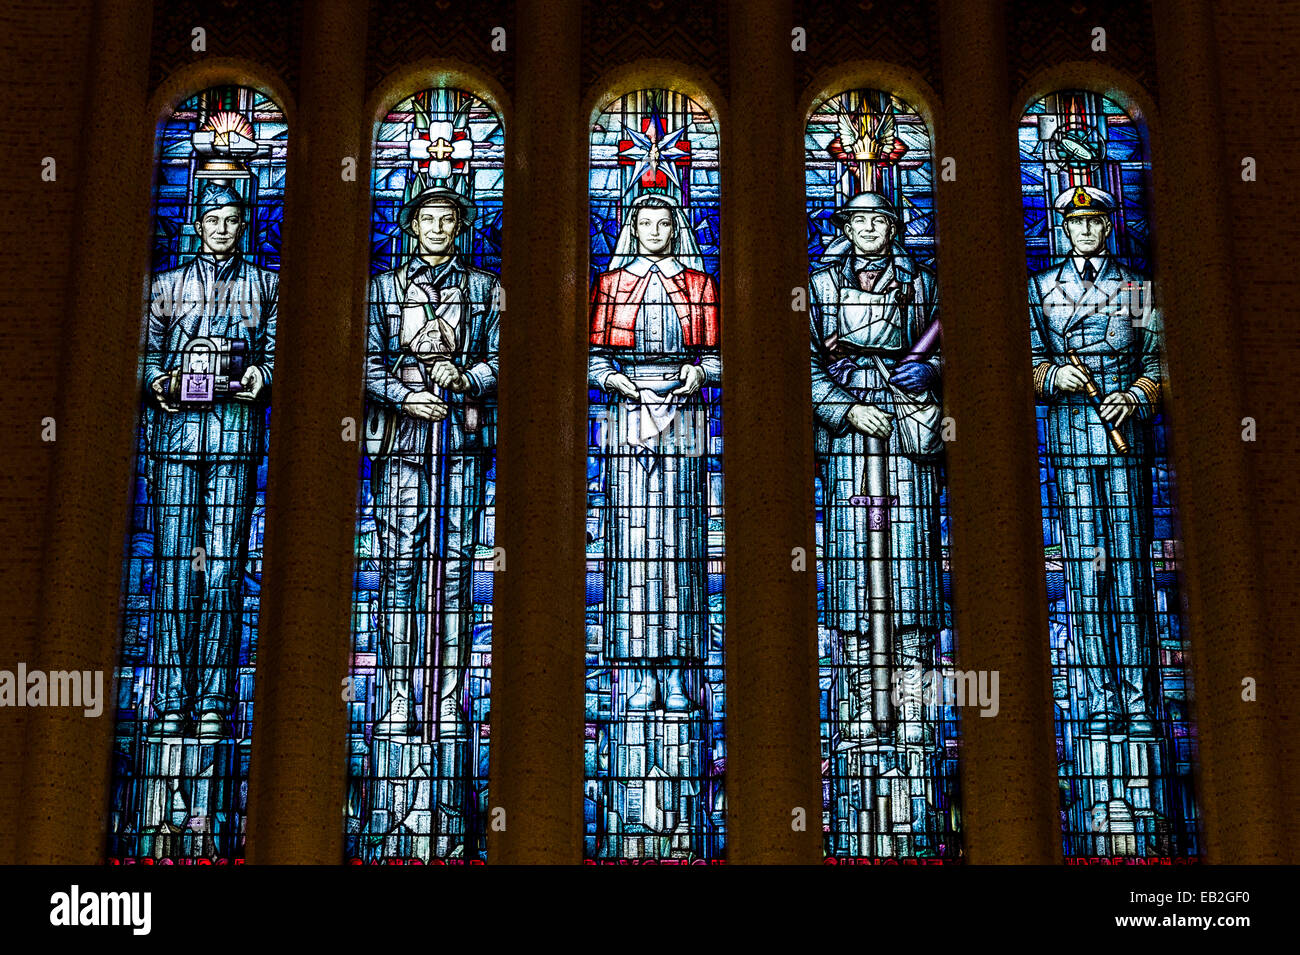 Stained glass windows in the Hall of Memory of the Australian War Memorial. Stock Photo